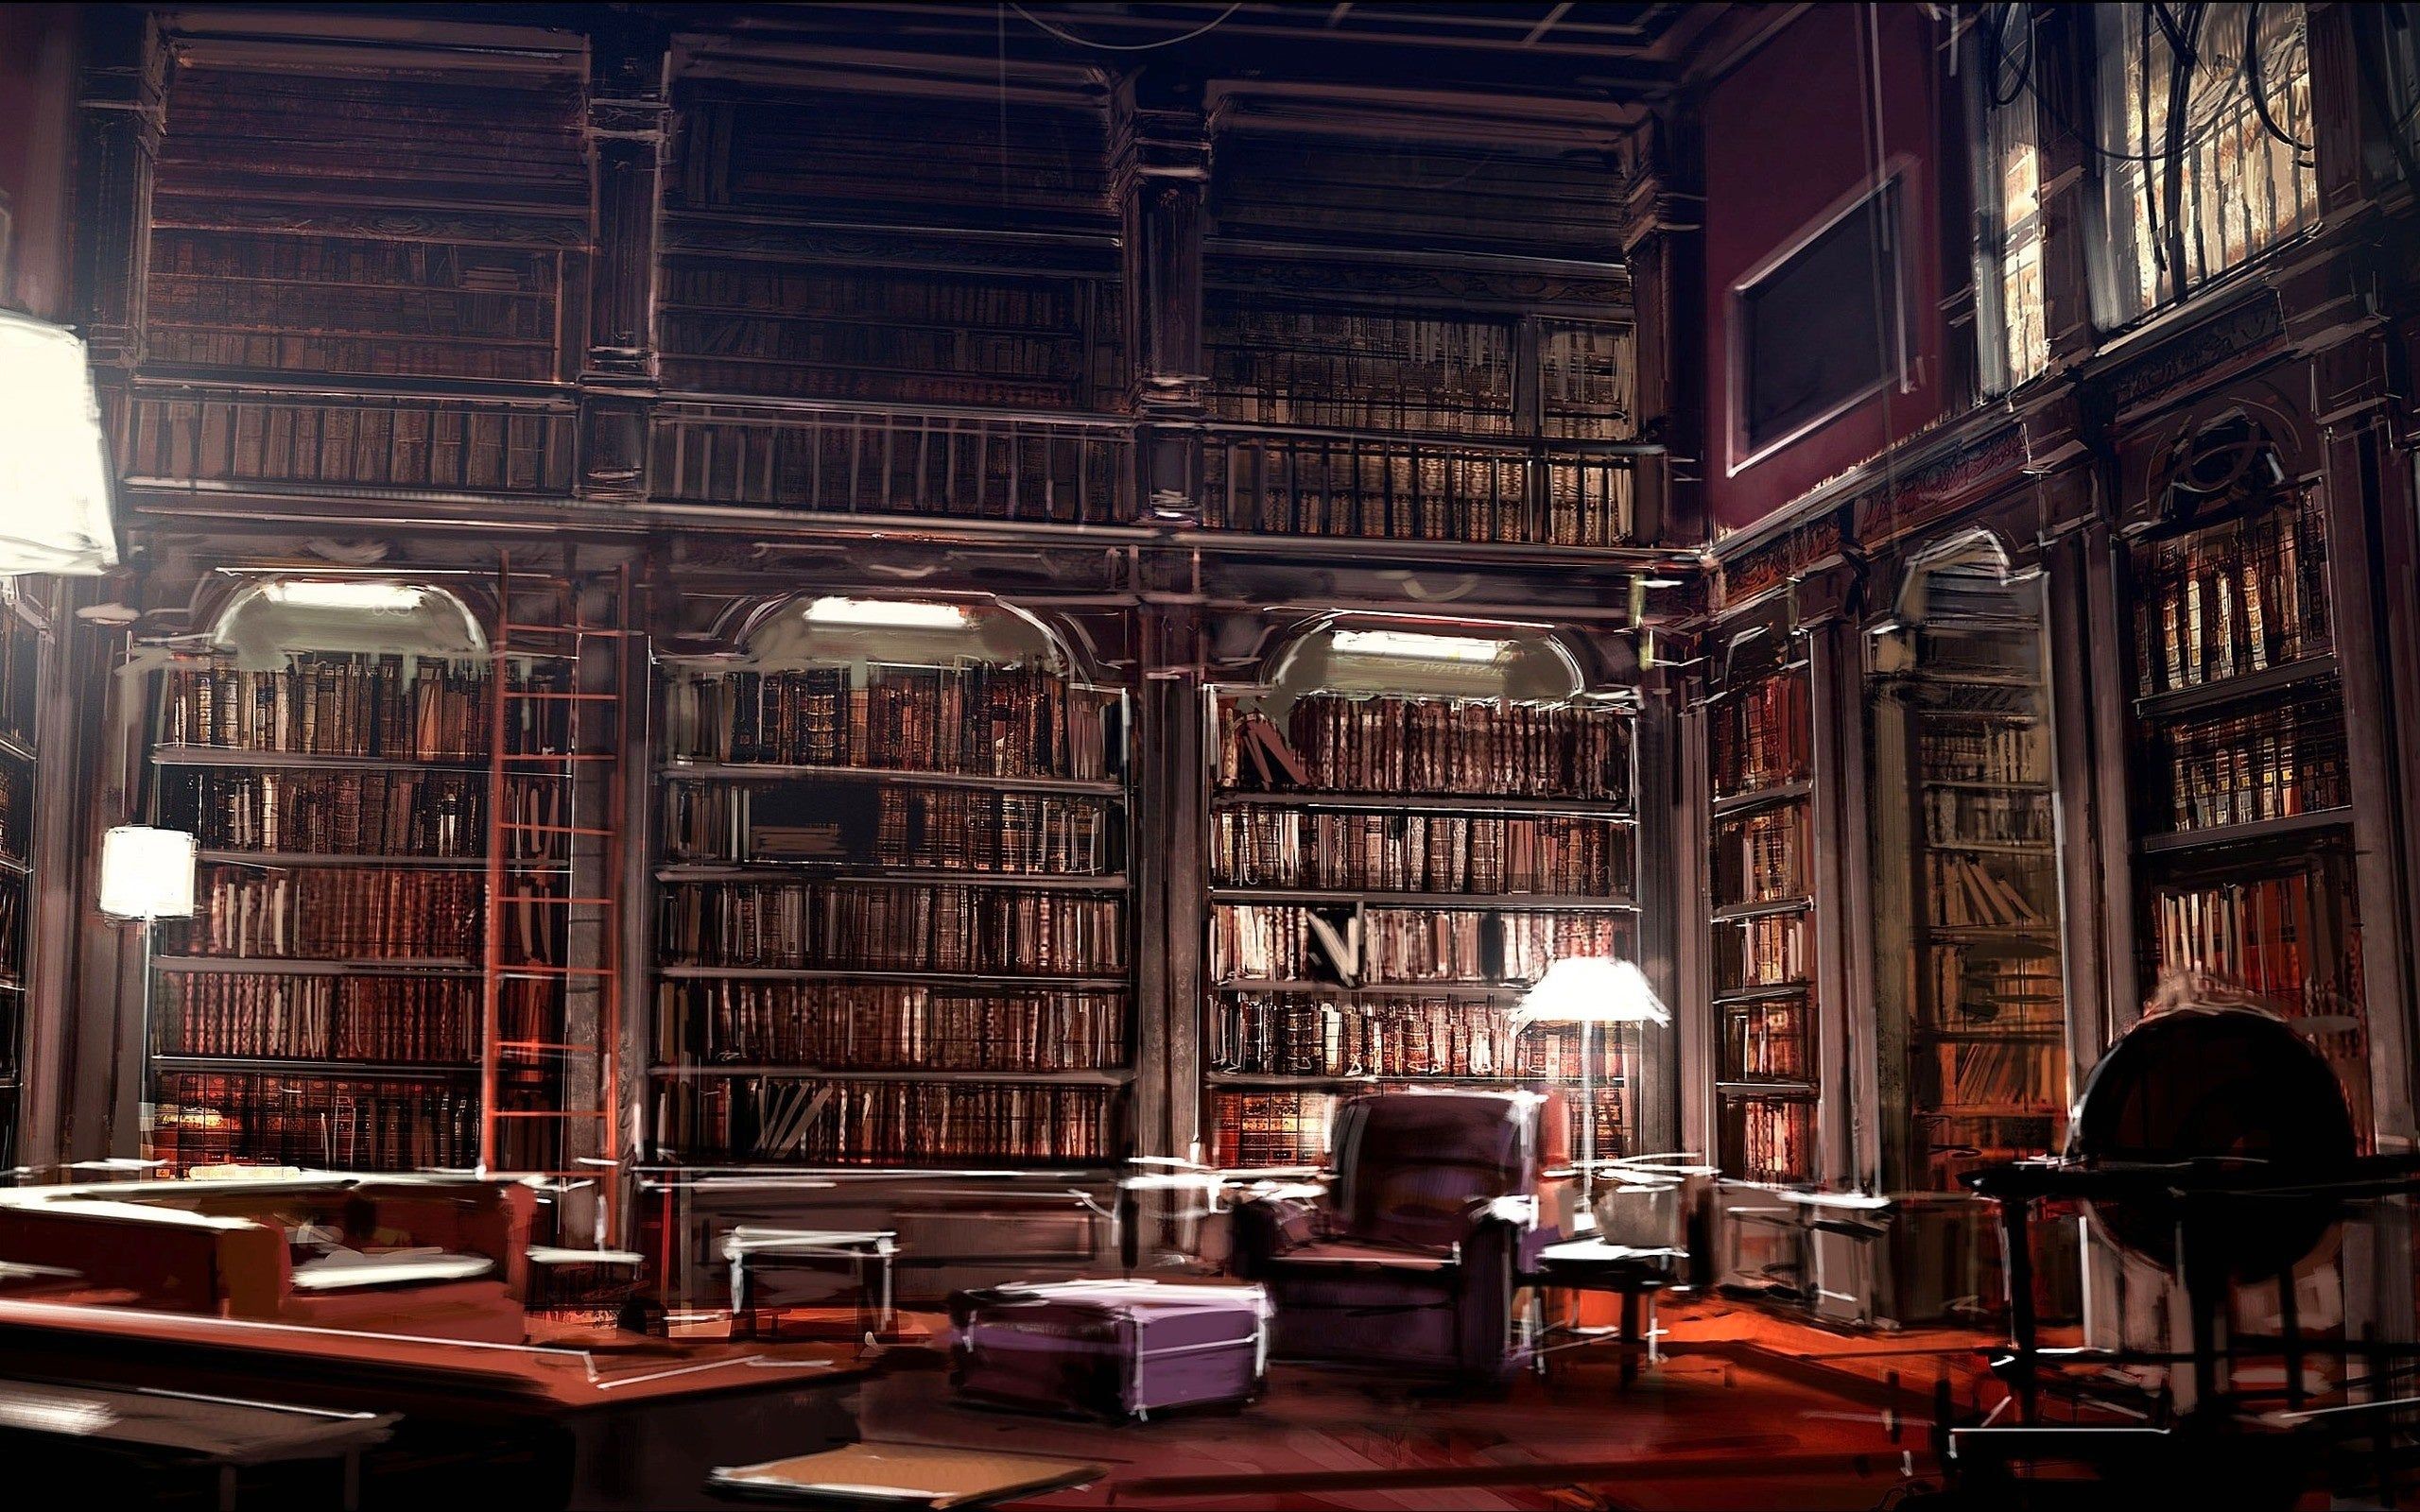 Library 4K wallpaper for your desktop or mobile screen free and easy to download